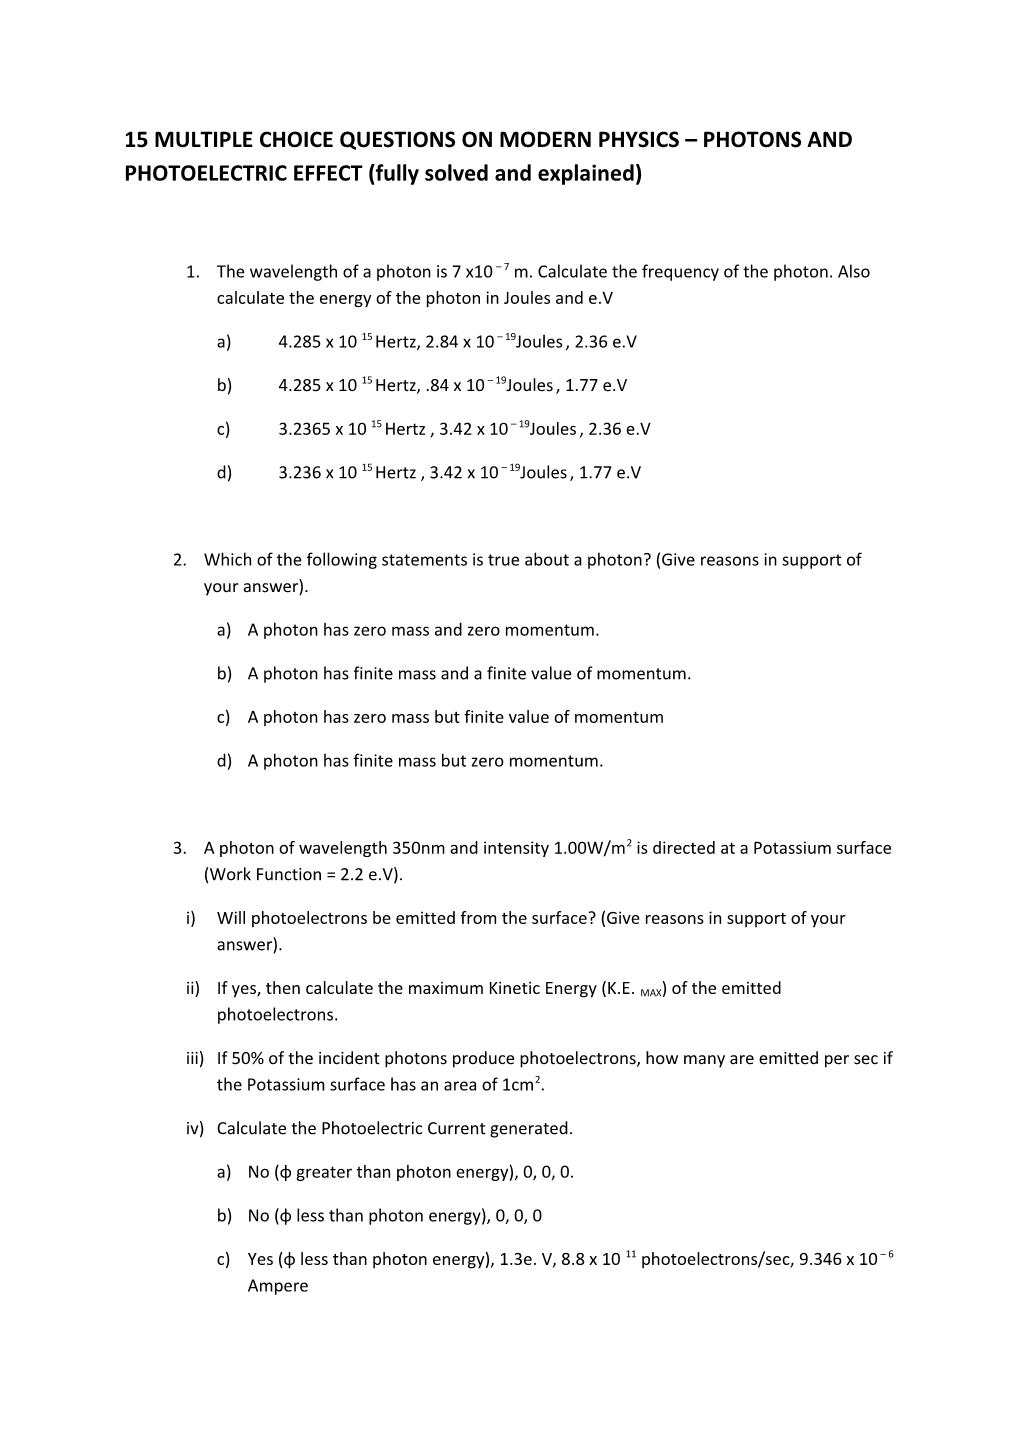 15MULTIPLE CHOICE QUESTIONS on MODERN PHYSICS PHOTONS and PHOTOELECTRIC EFFECT (Fully